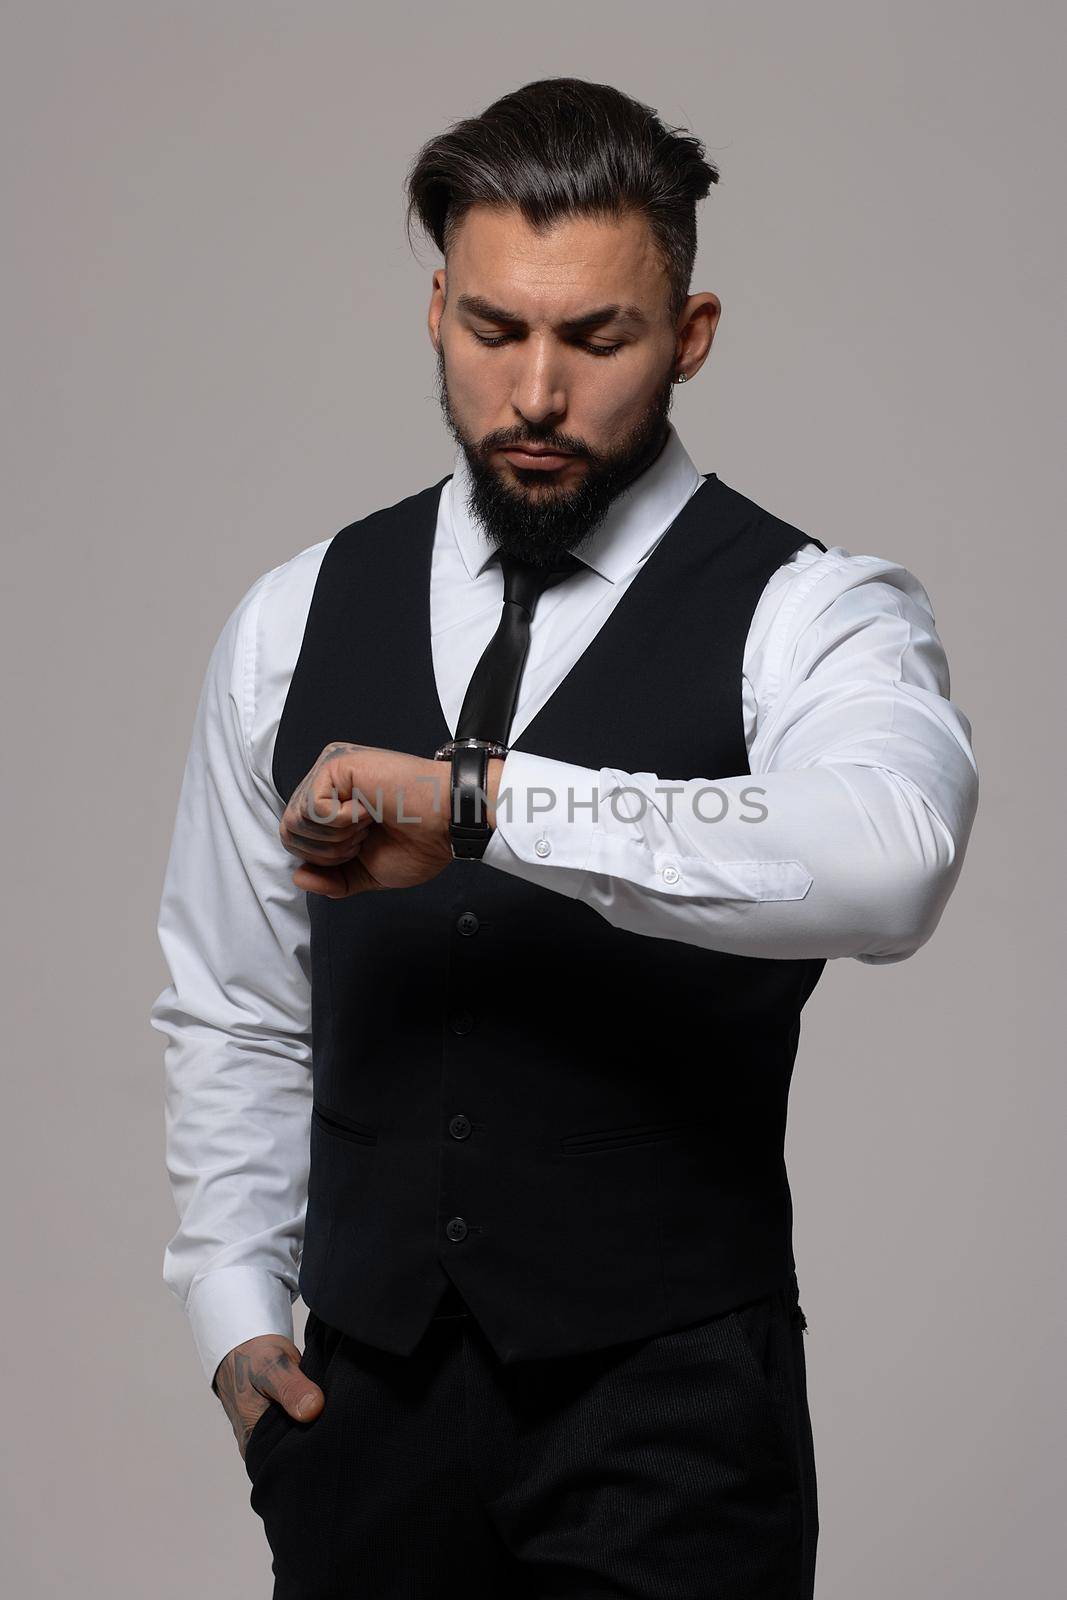 Bearded Hispanic guy in dark vest and white shirt with tie looking at camera with hands in pockets in studio